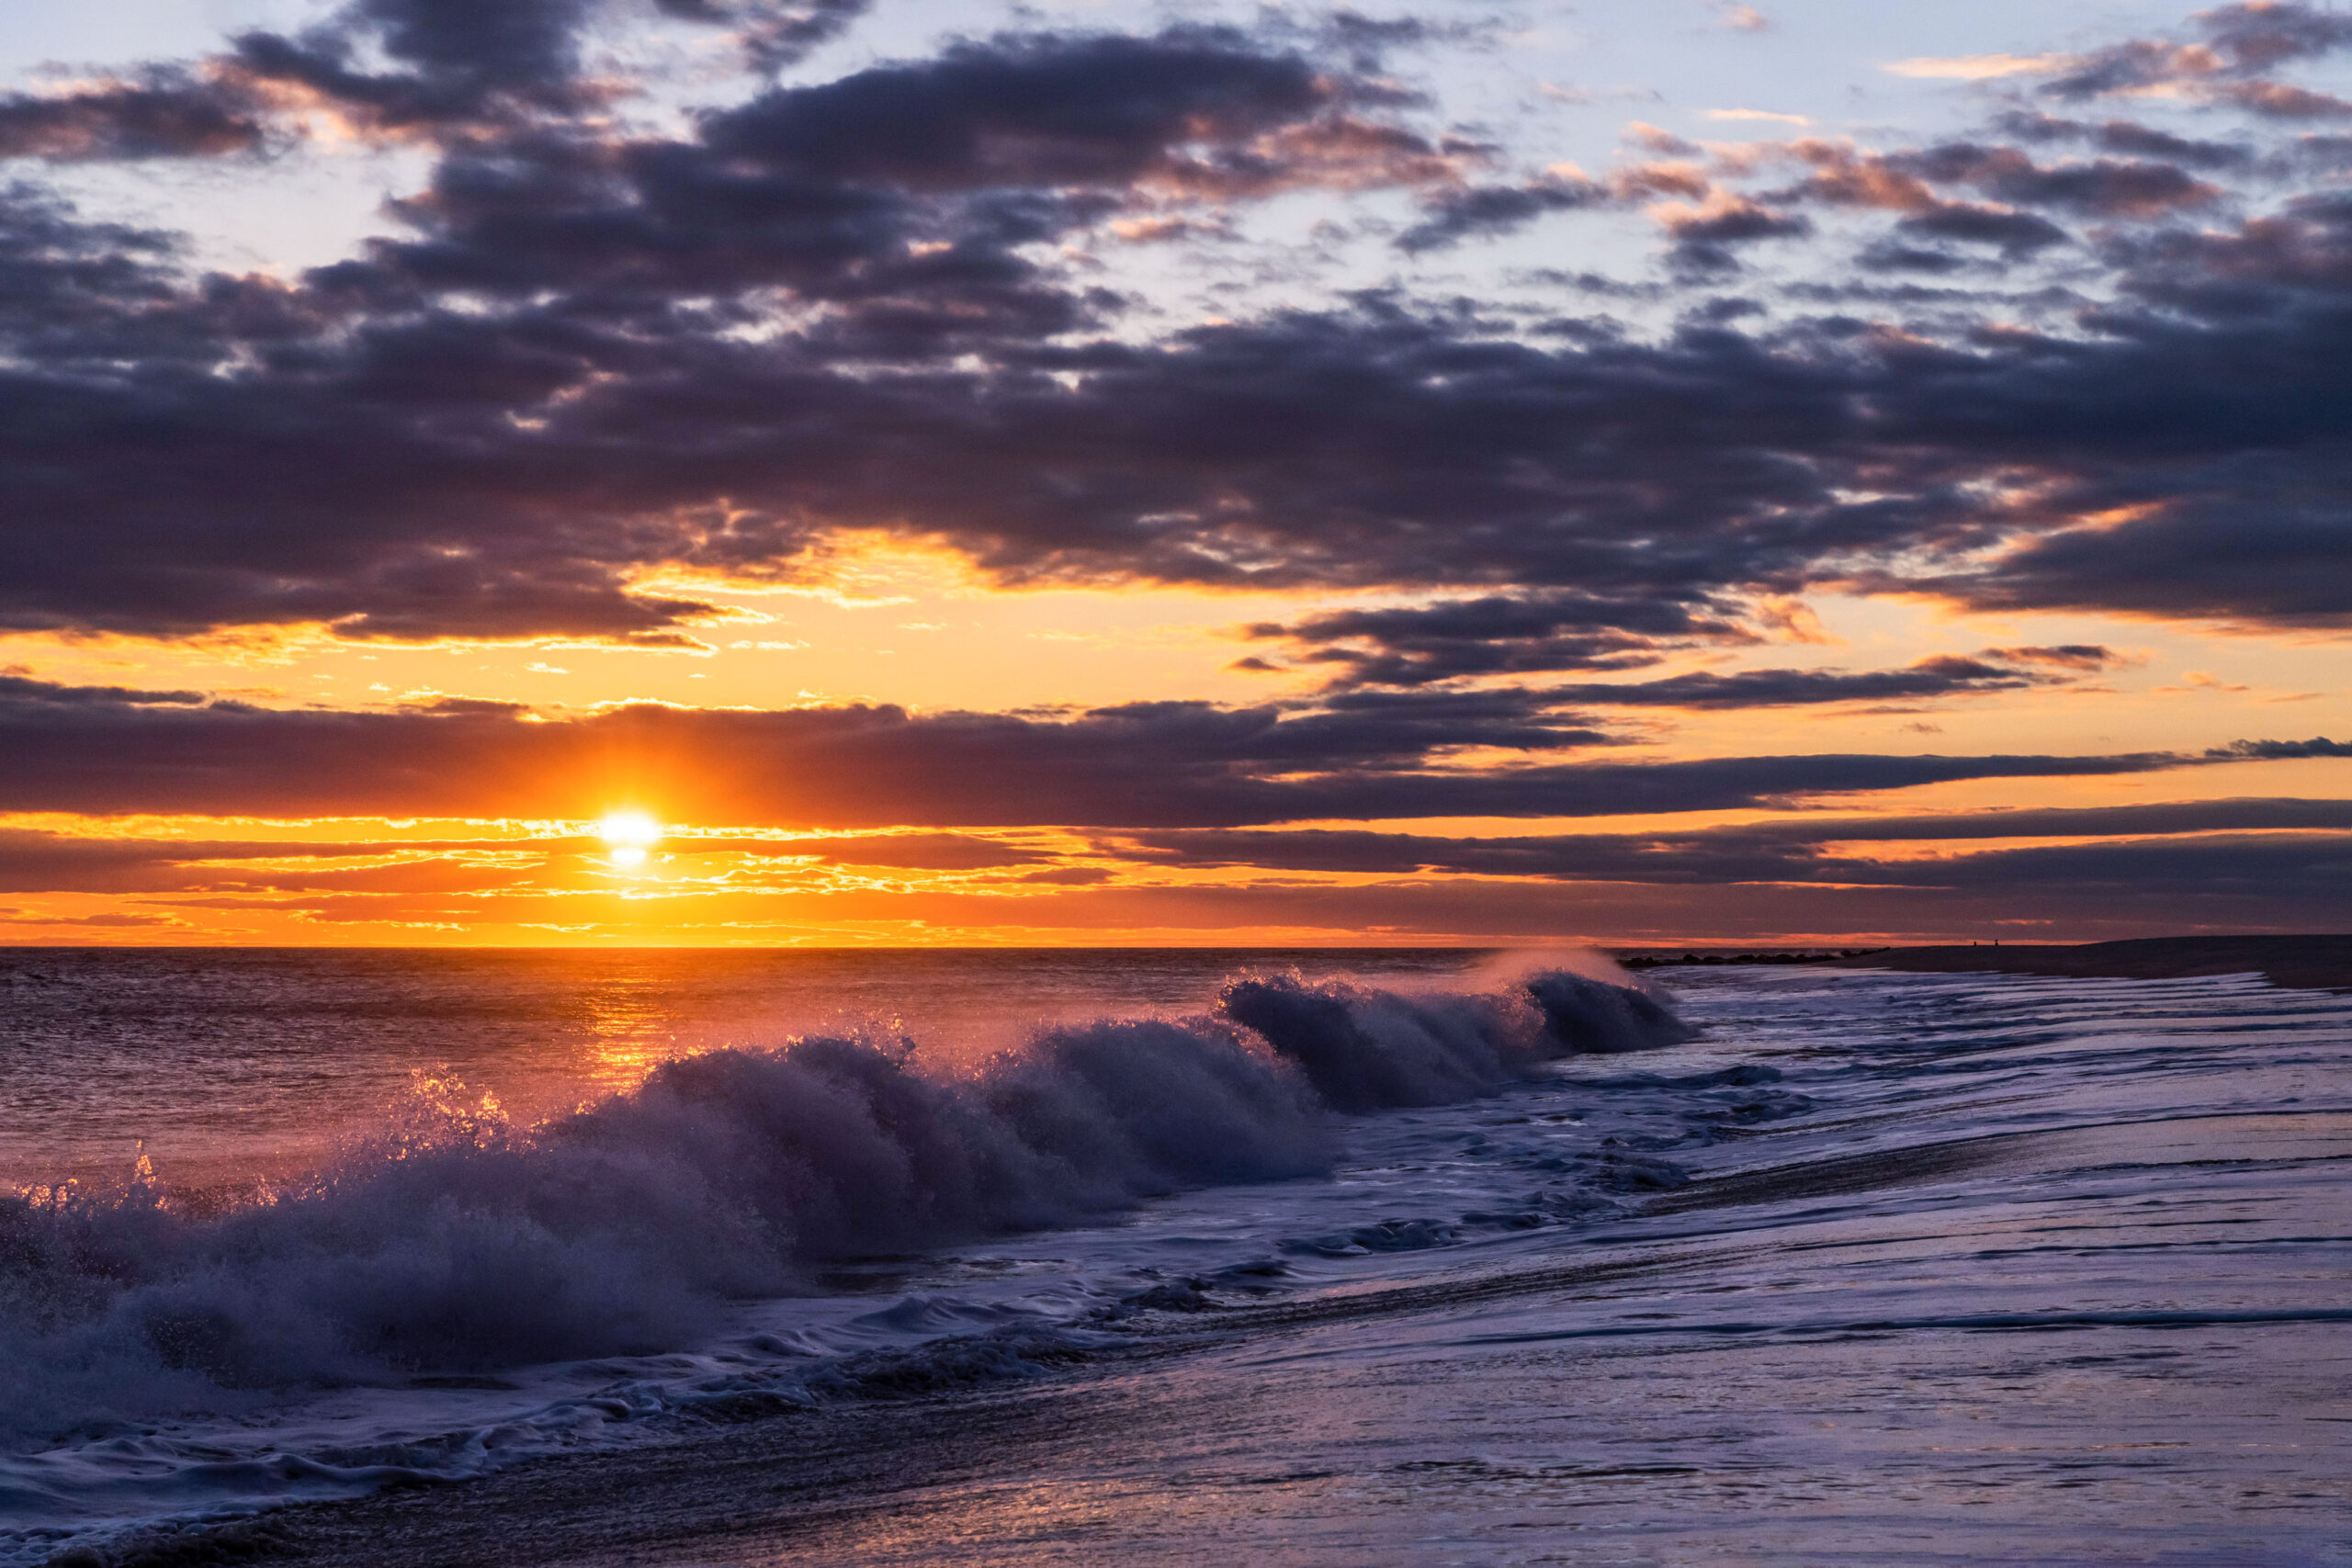 A wave crashing on the beach at sunset with purple, pink, yellow, and orange clouds in the sky